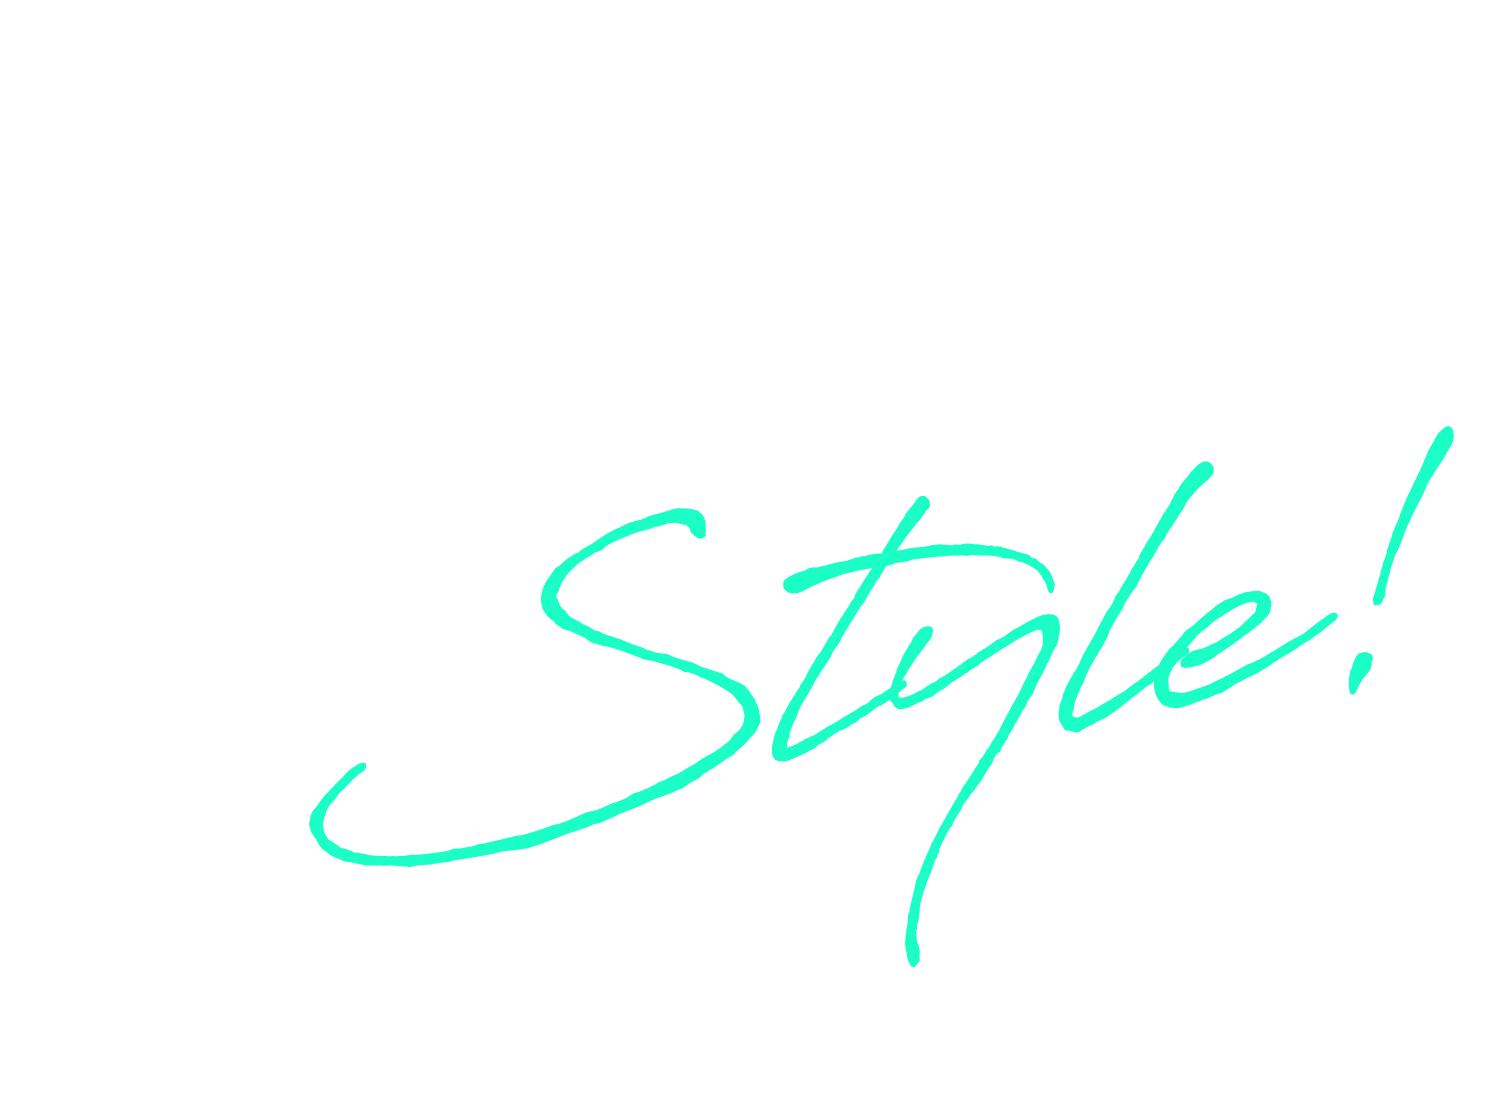 Bench Style!